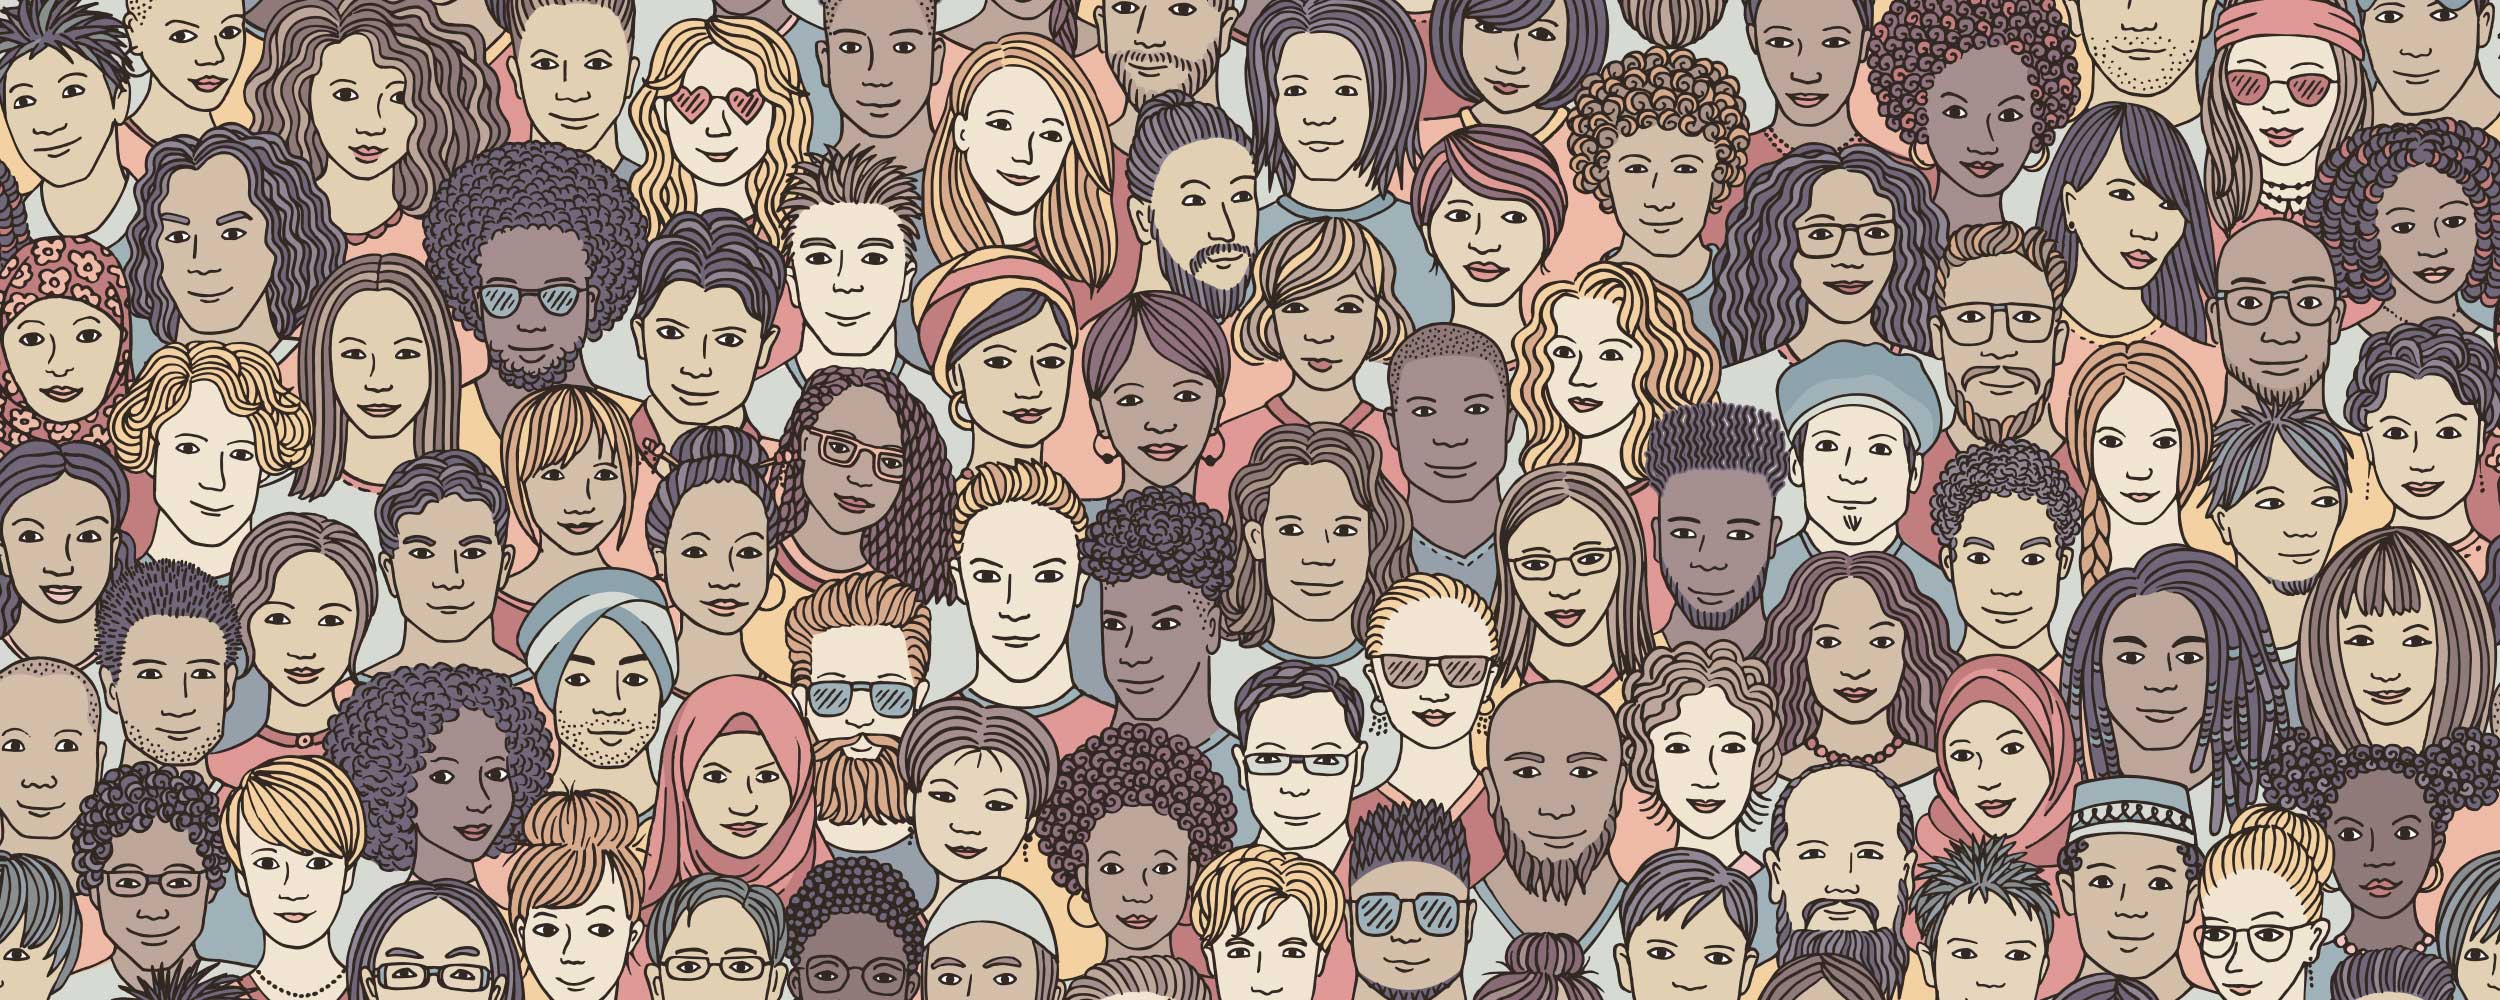 graphic representation of a diverse group of human faces